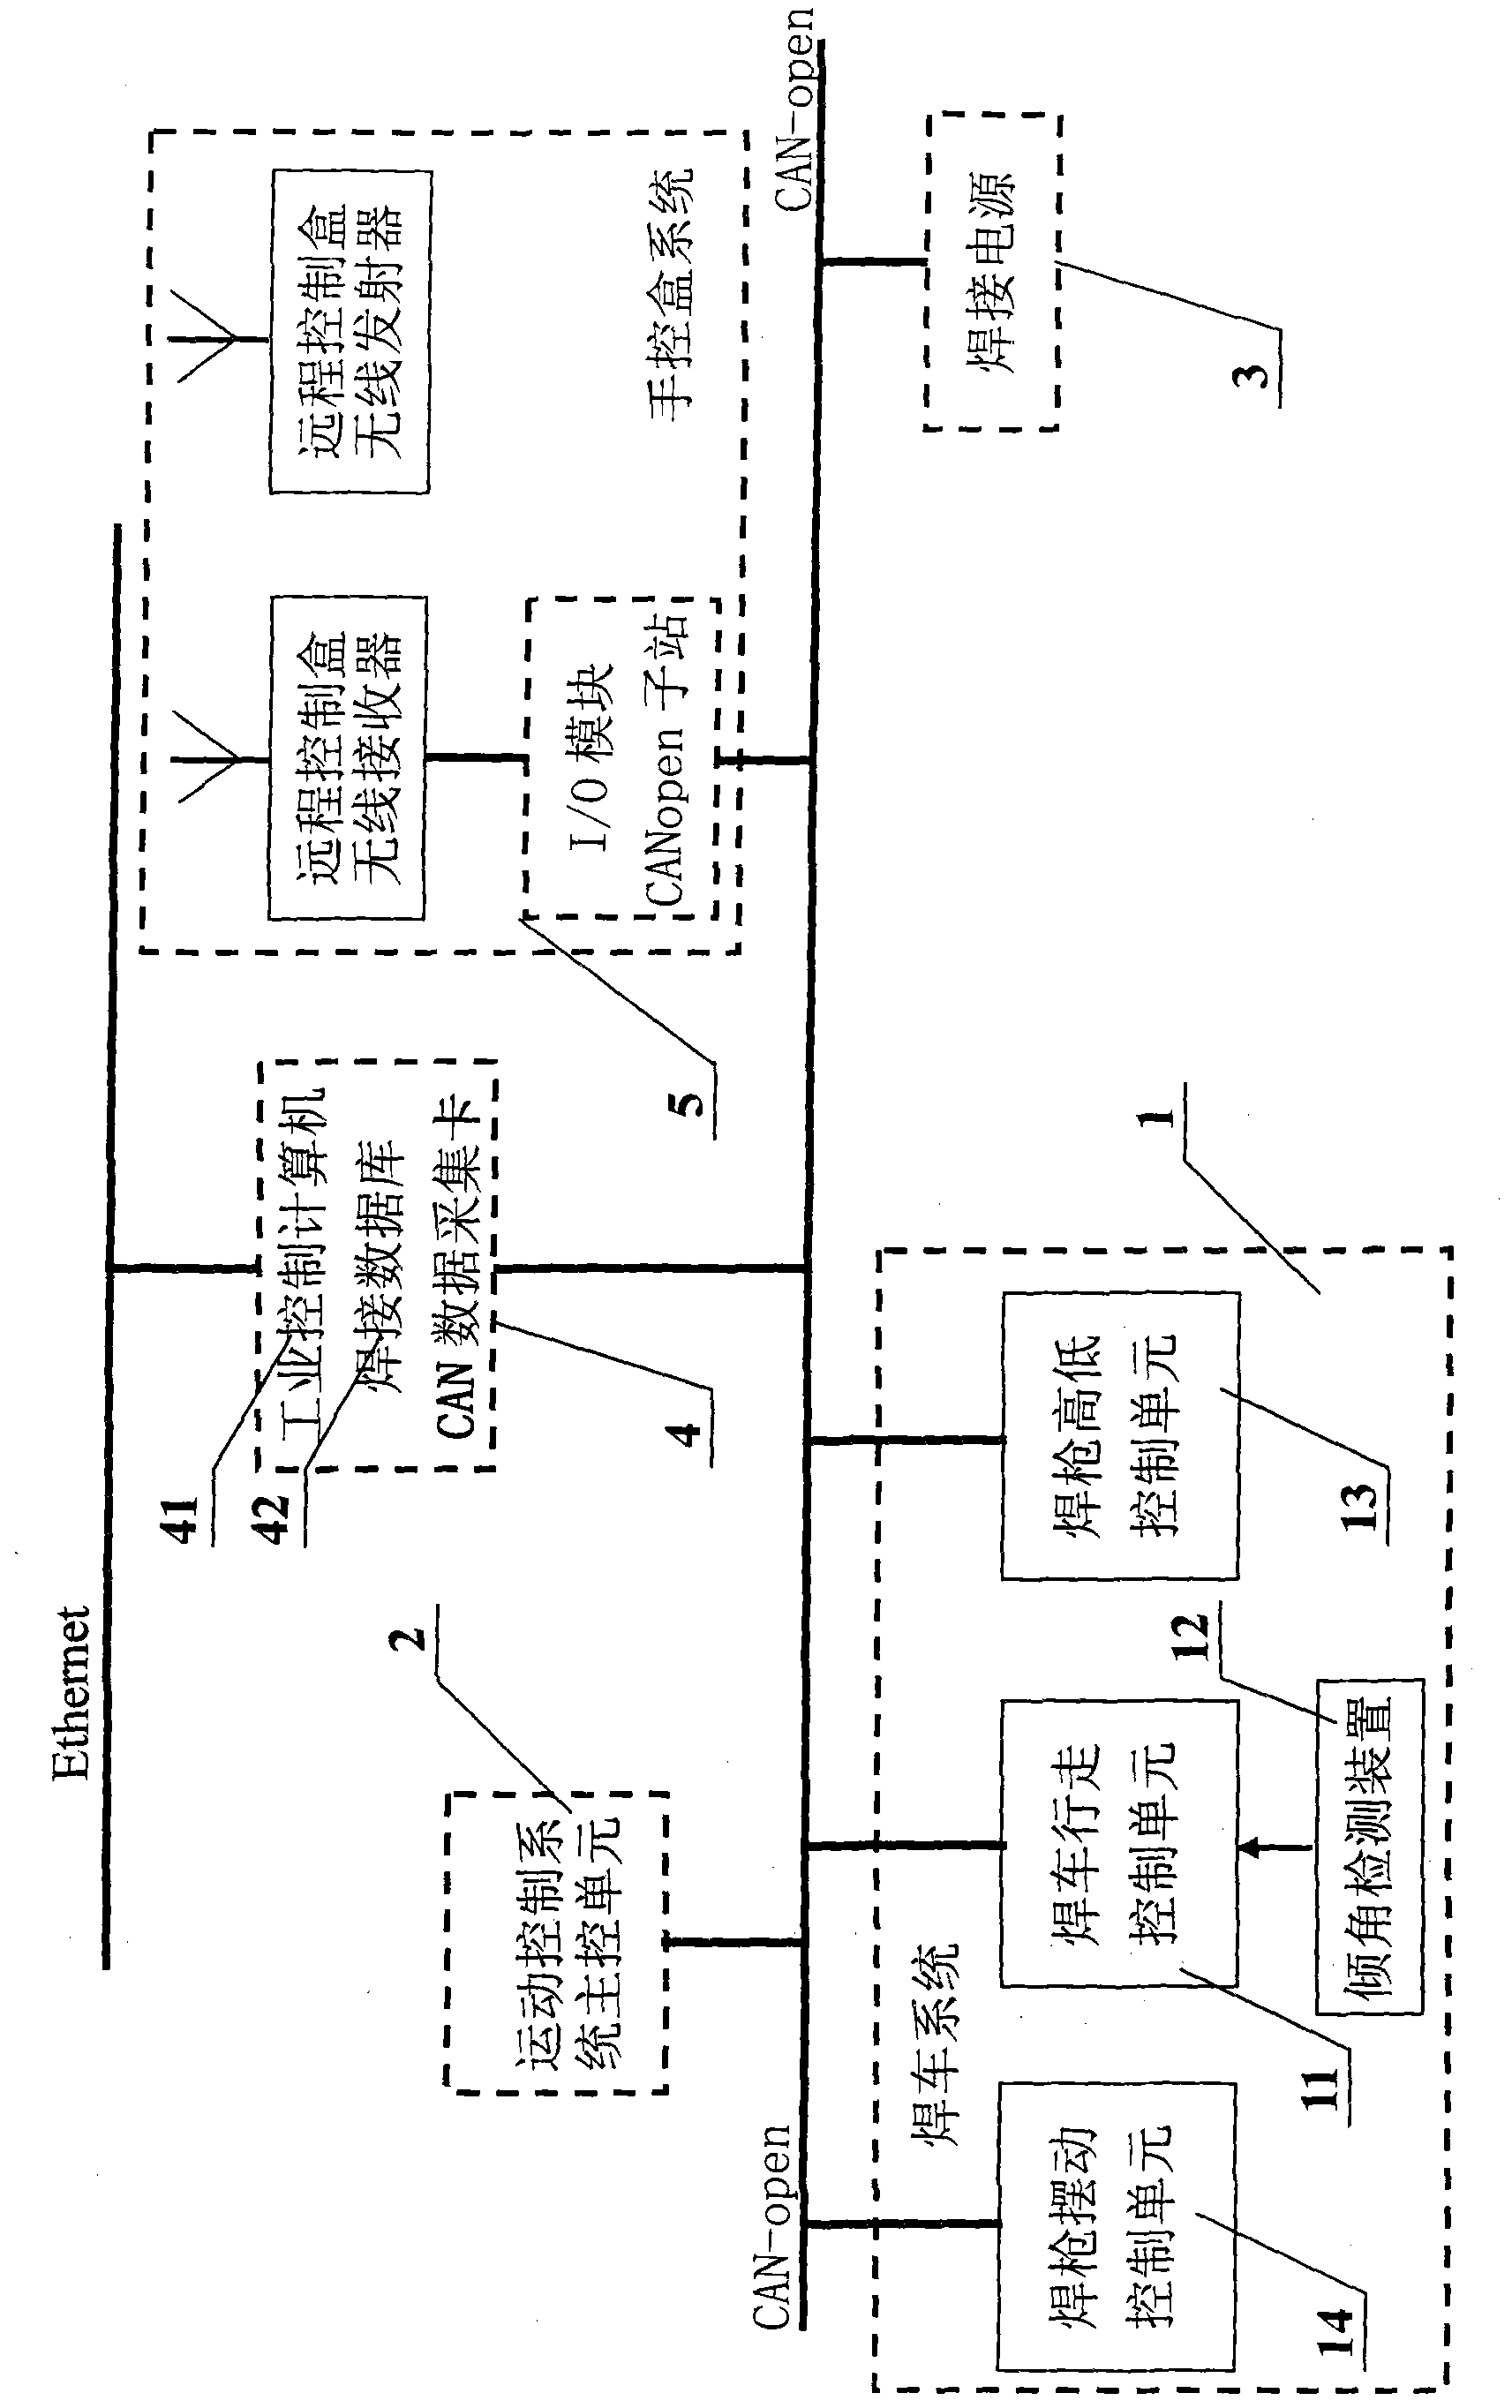 Network-based pipeline all-position welding control system